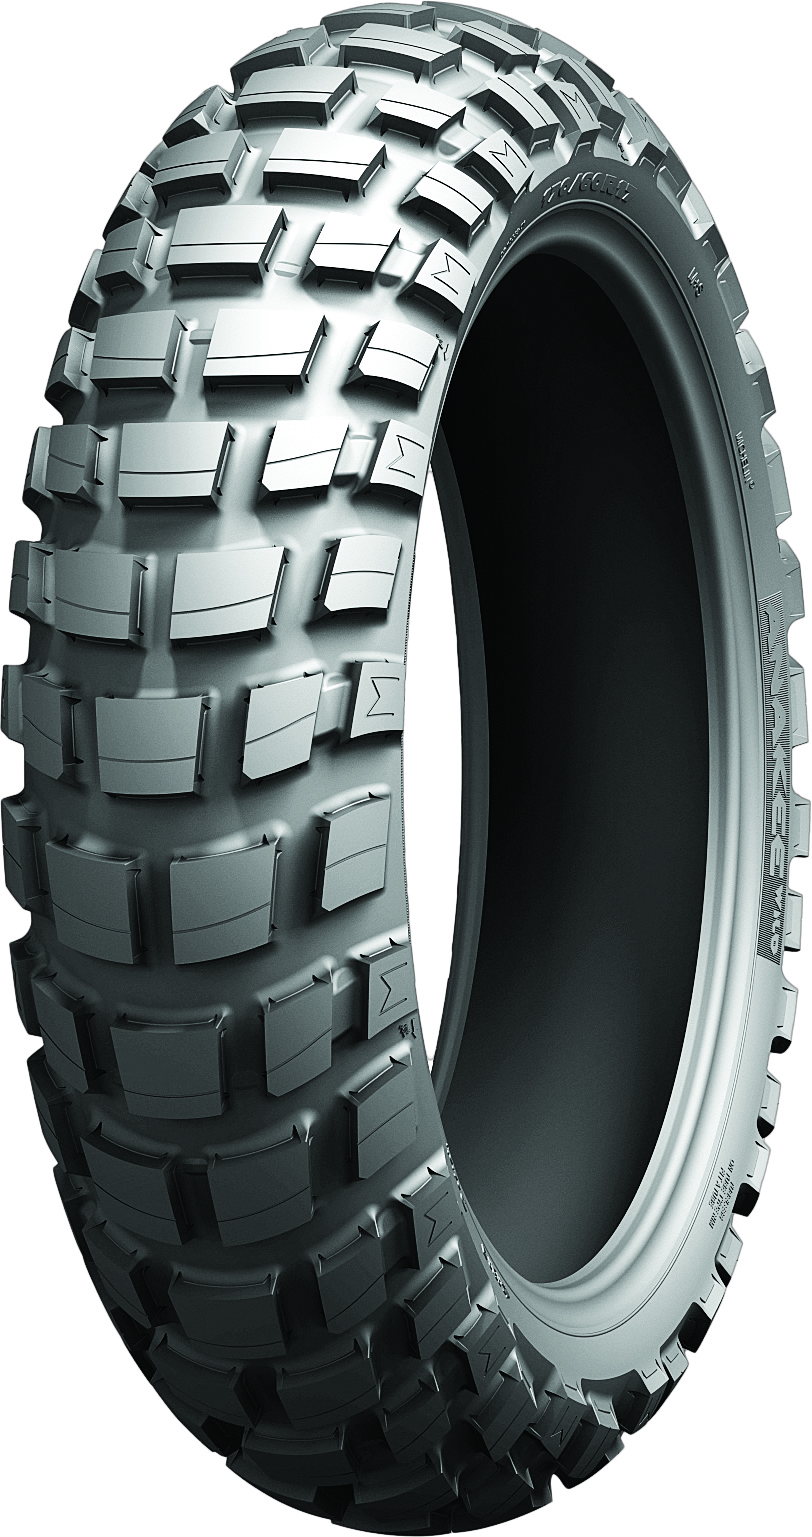 140/80-18 70R Anakee Wild Rear Motorcycle Tire TL/TT - Click Image to Close